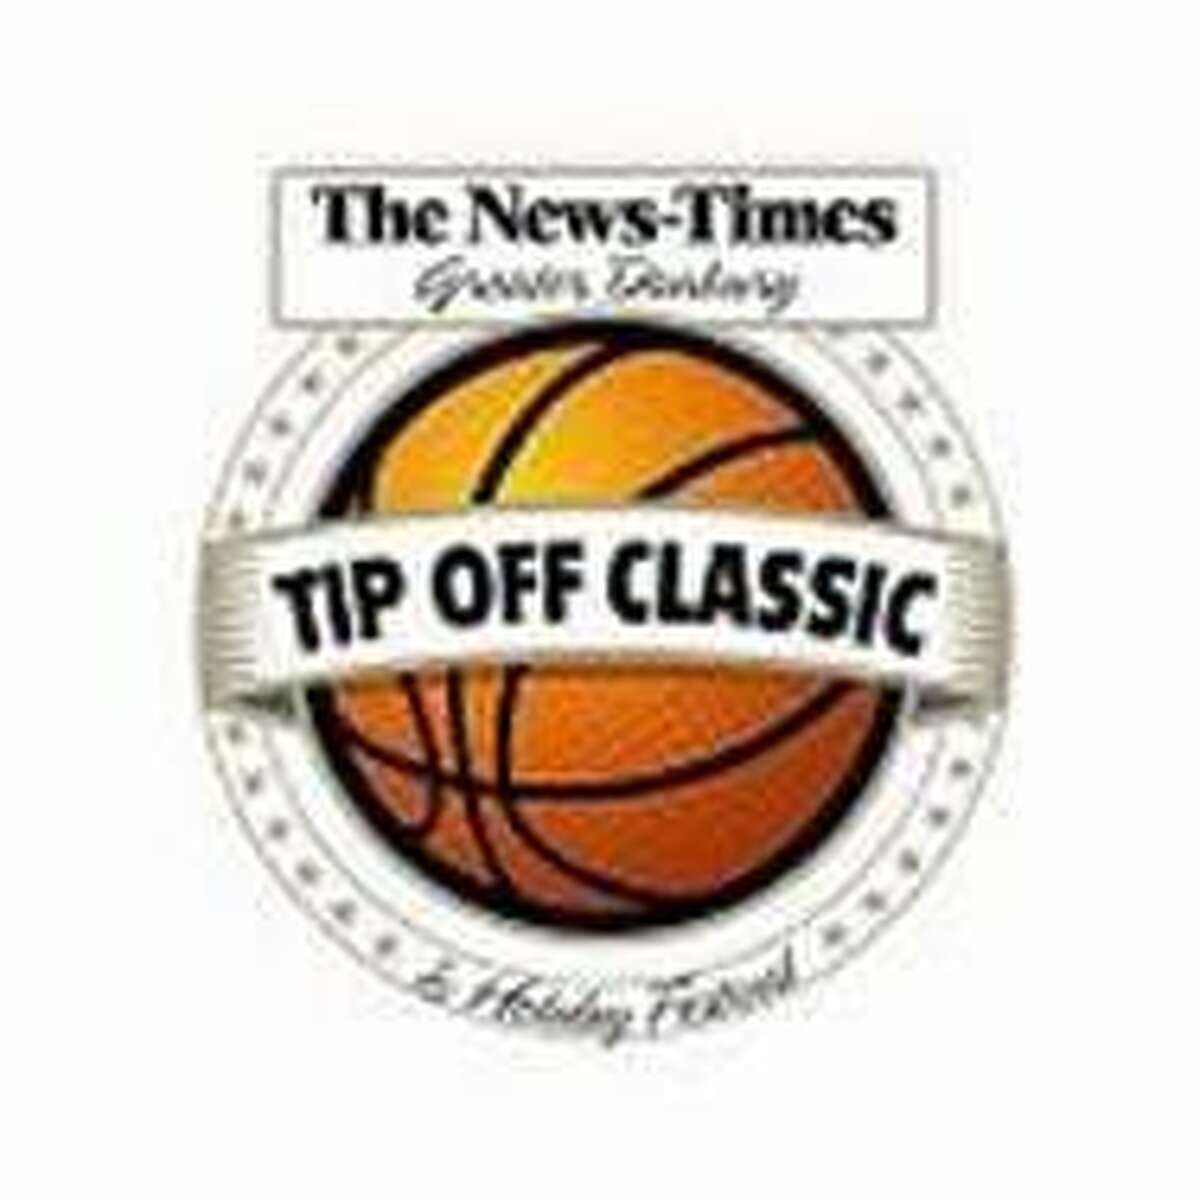 News-Times Greater Danbury Tip-Off Classic and Holiday Festival basketball tournament logo.